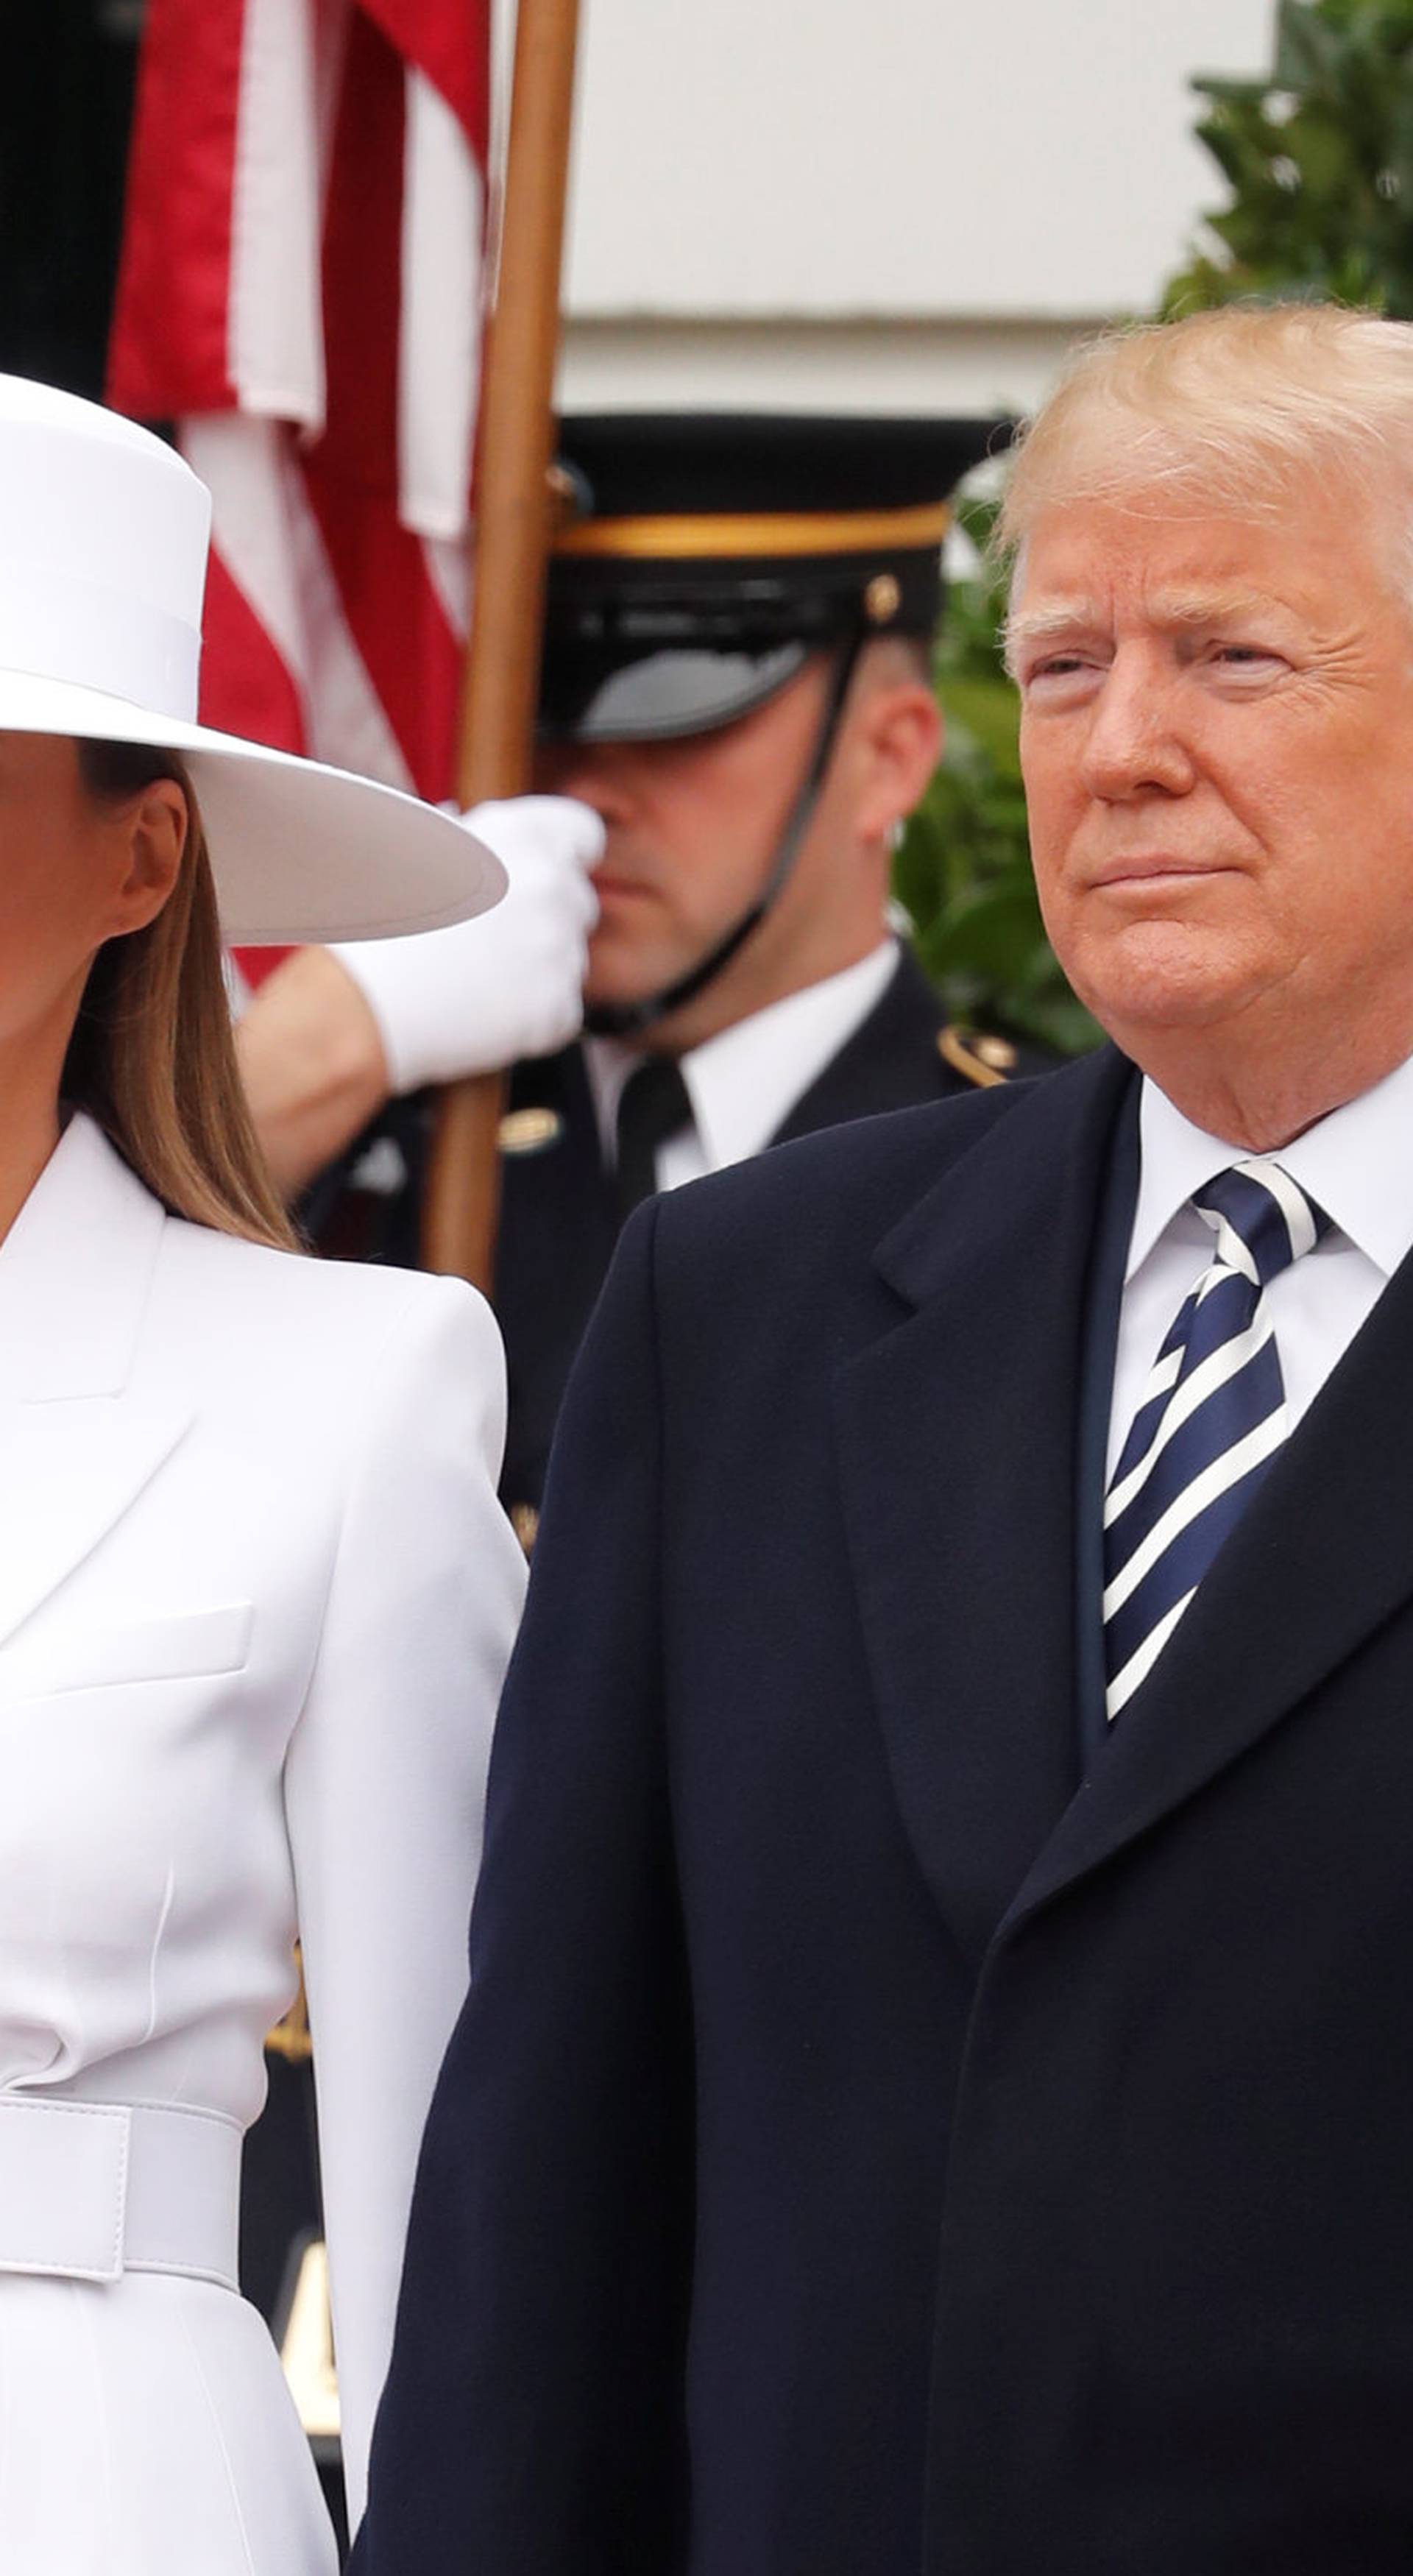 U.S. President Trump and first lady Melania wait to welcome French President Macron and his wife Brigitte during arrival ceremony at the White House in Washington